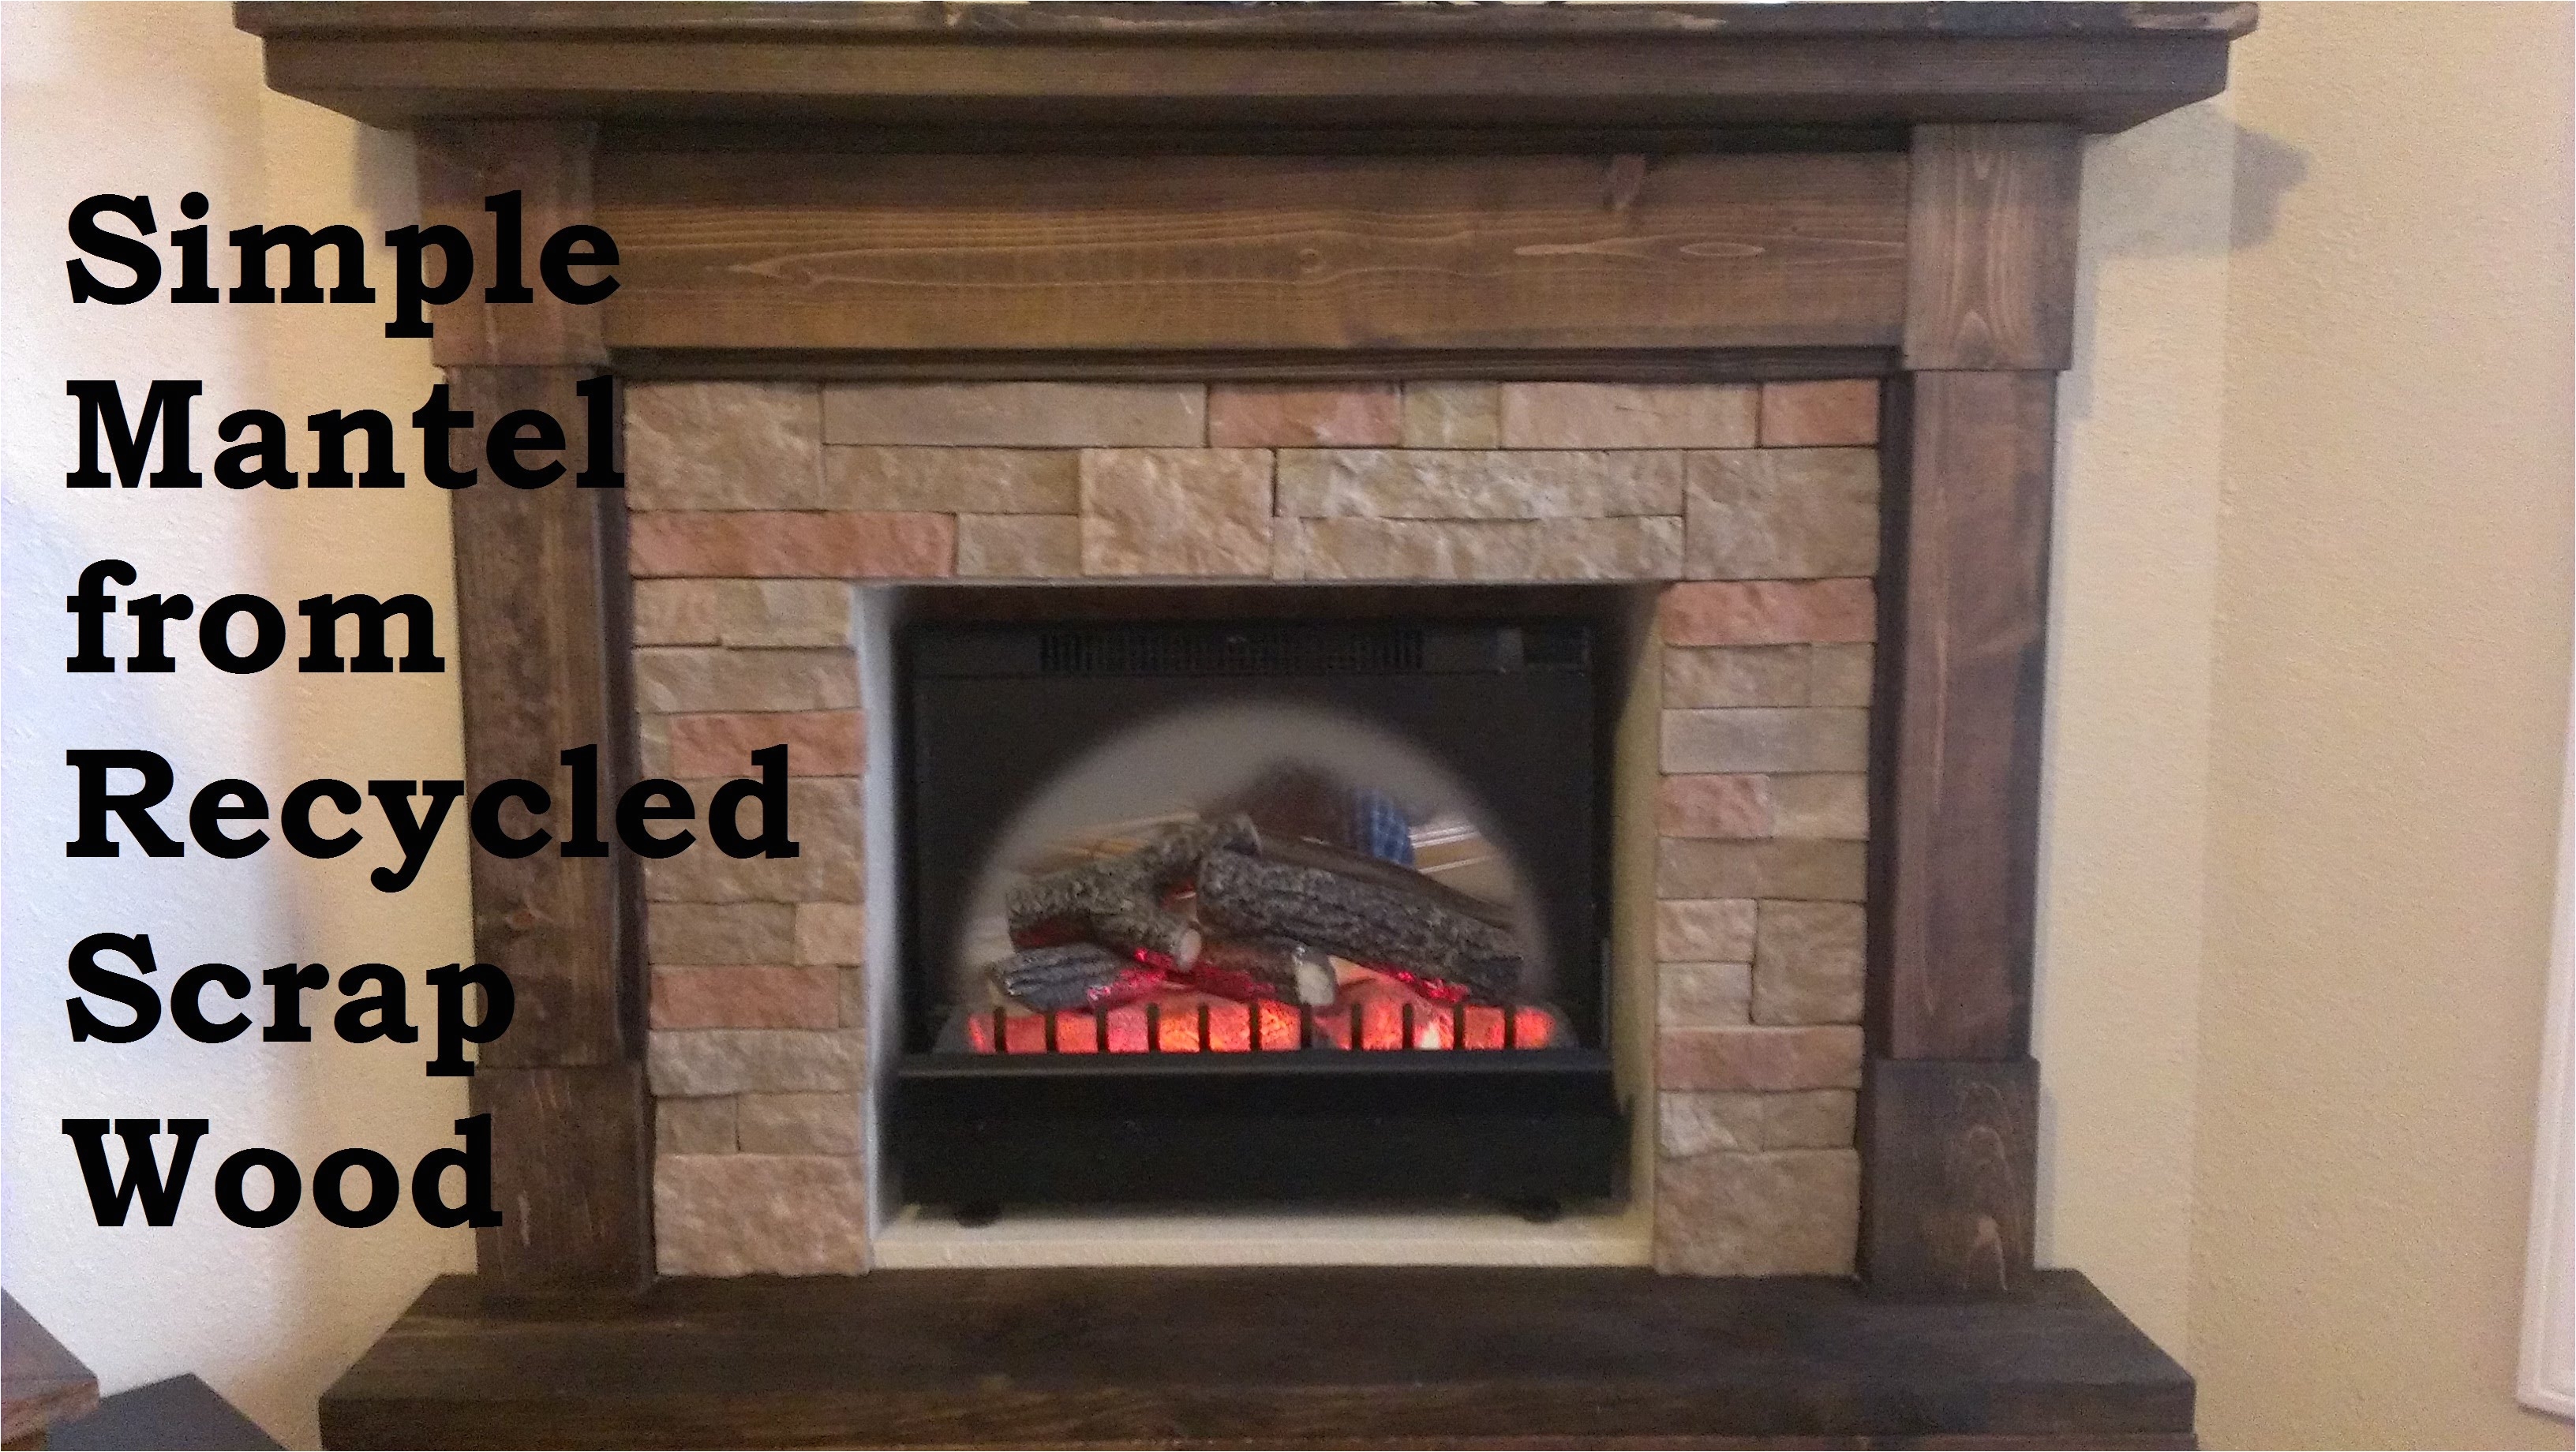 how to build a fireplace mantel from scratch building a fireplace mantel from scrap wood youtube of how to build a fireplace mantel from scratch